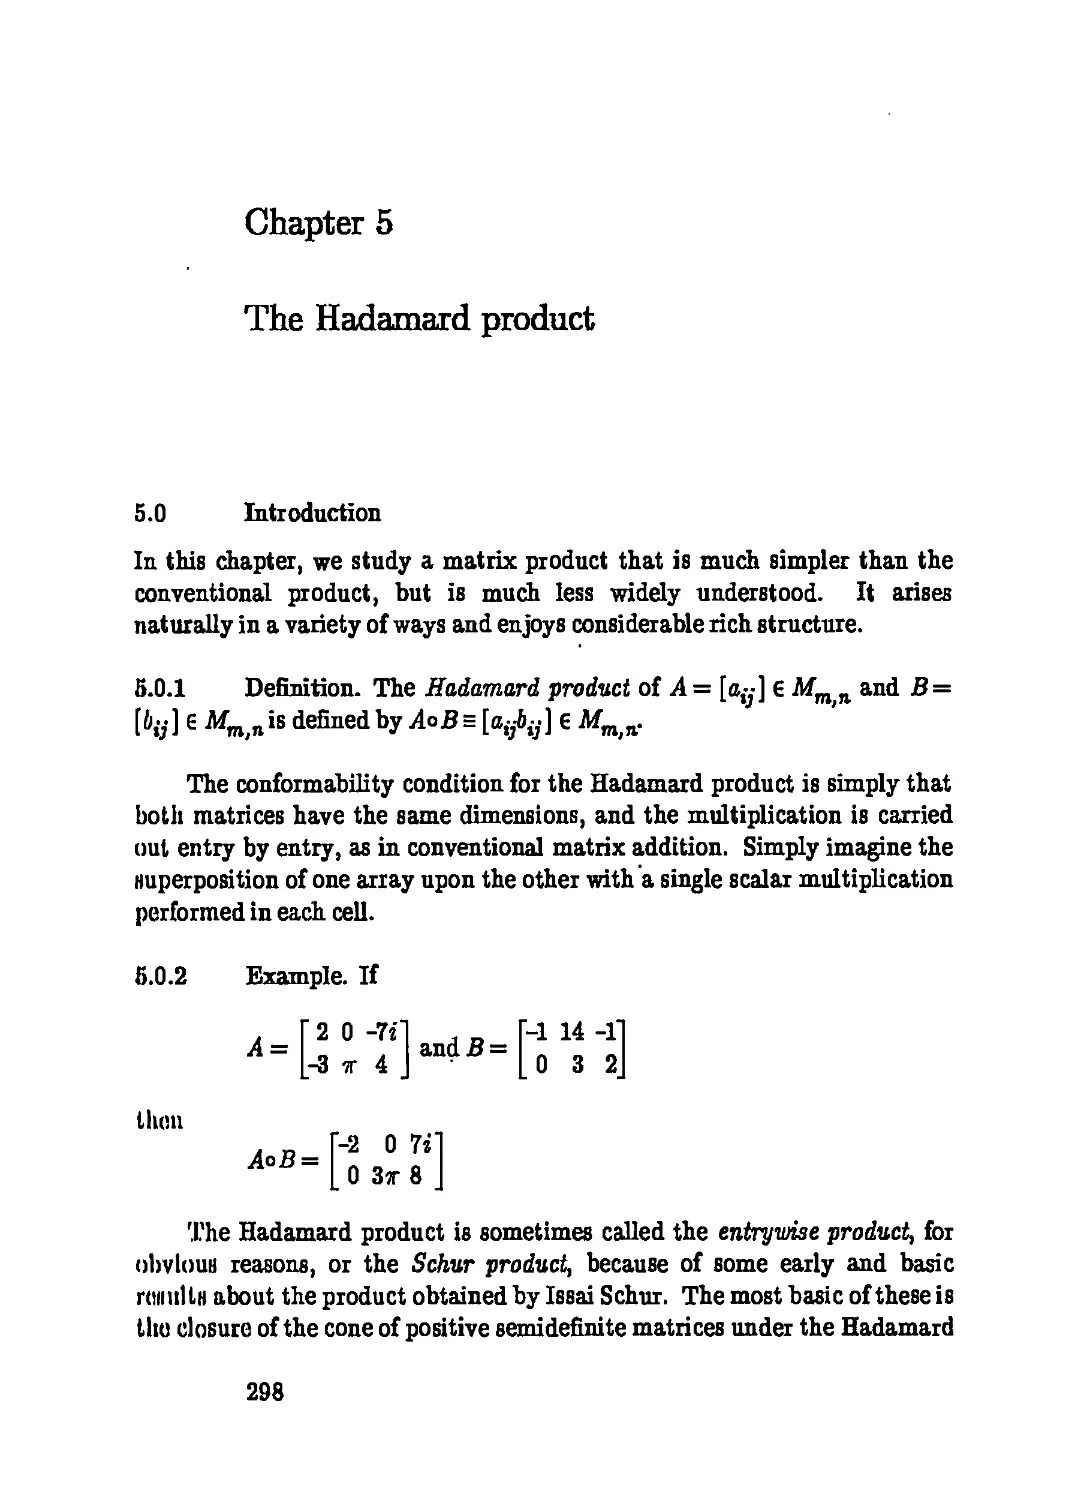 Chapter 5 The Hadamard product